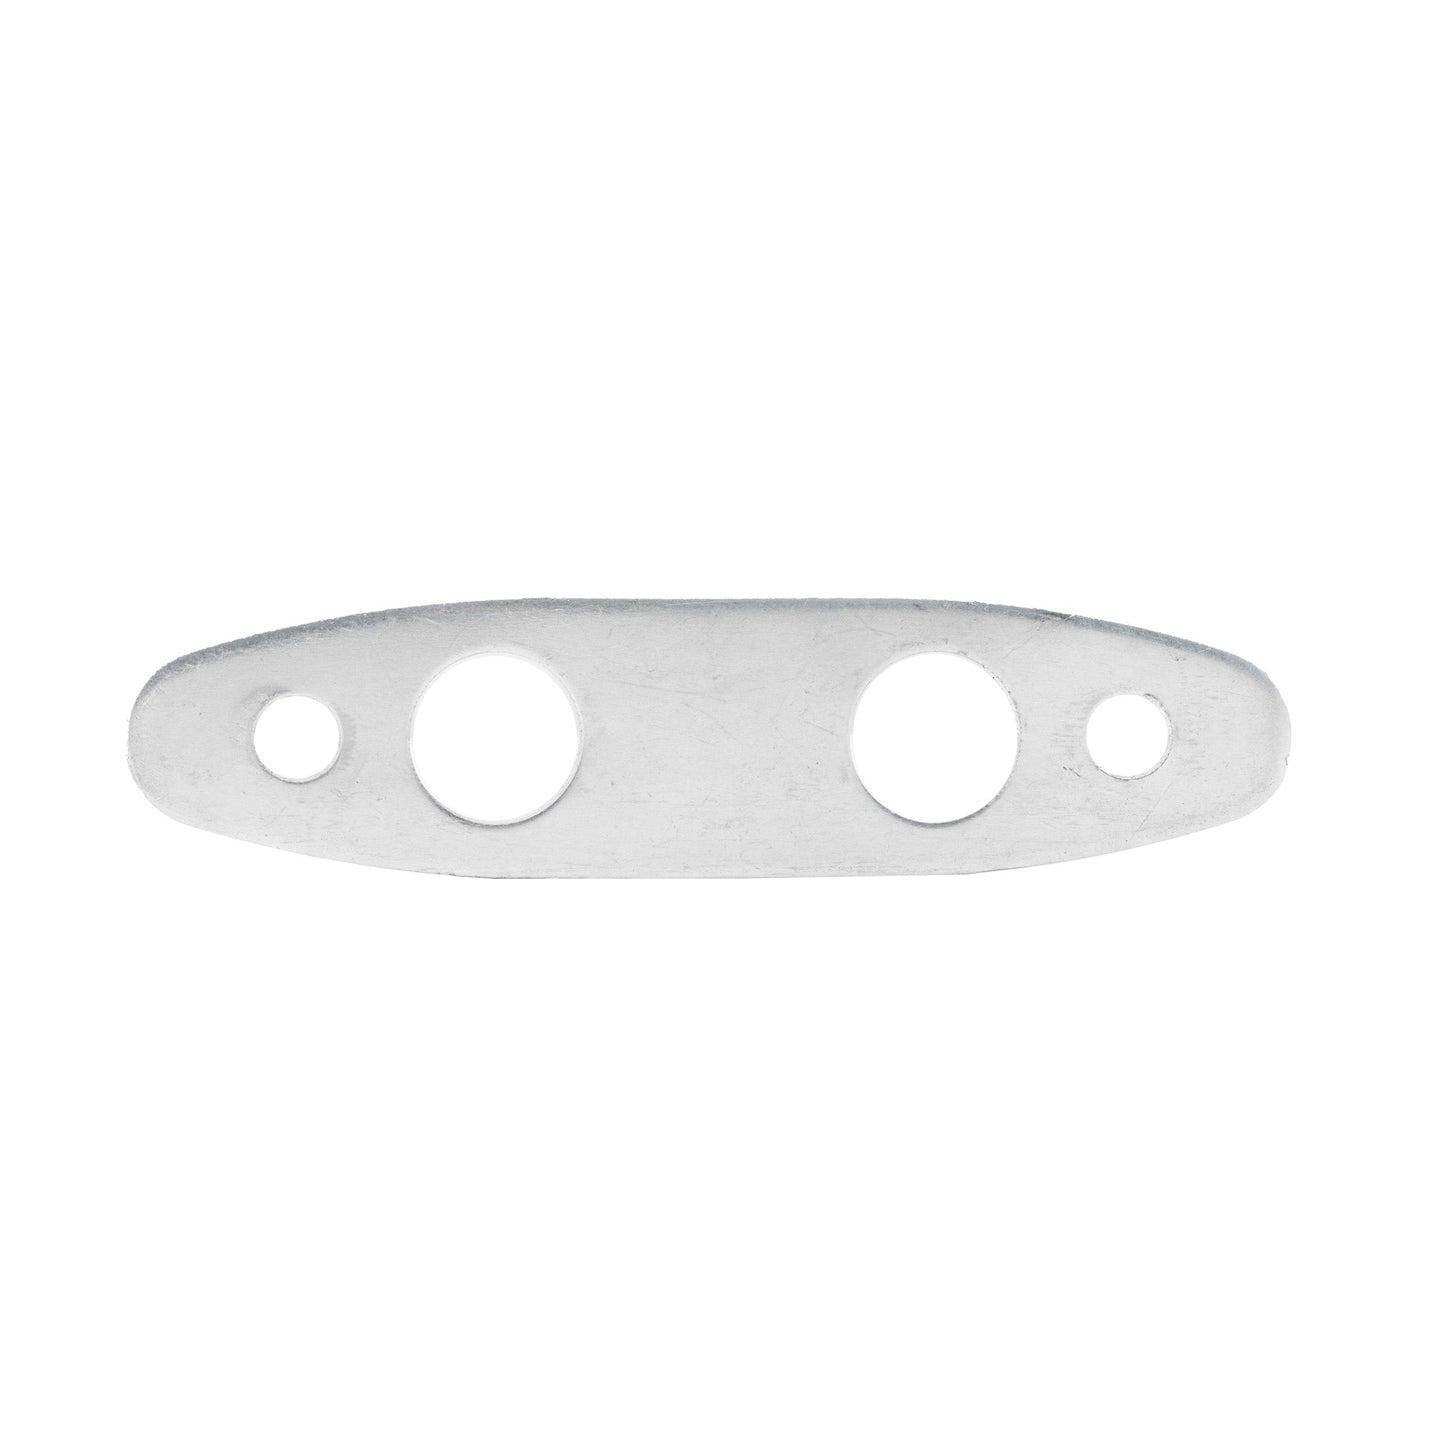 E-Z Cleat Backing Plate 6809BP